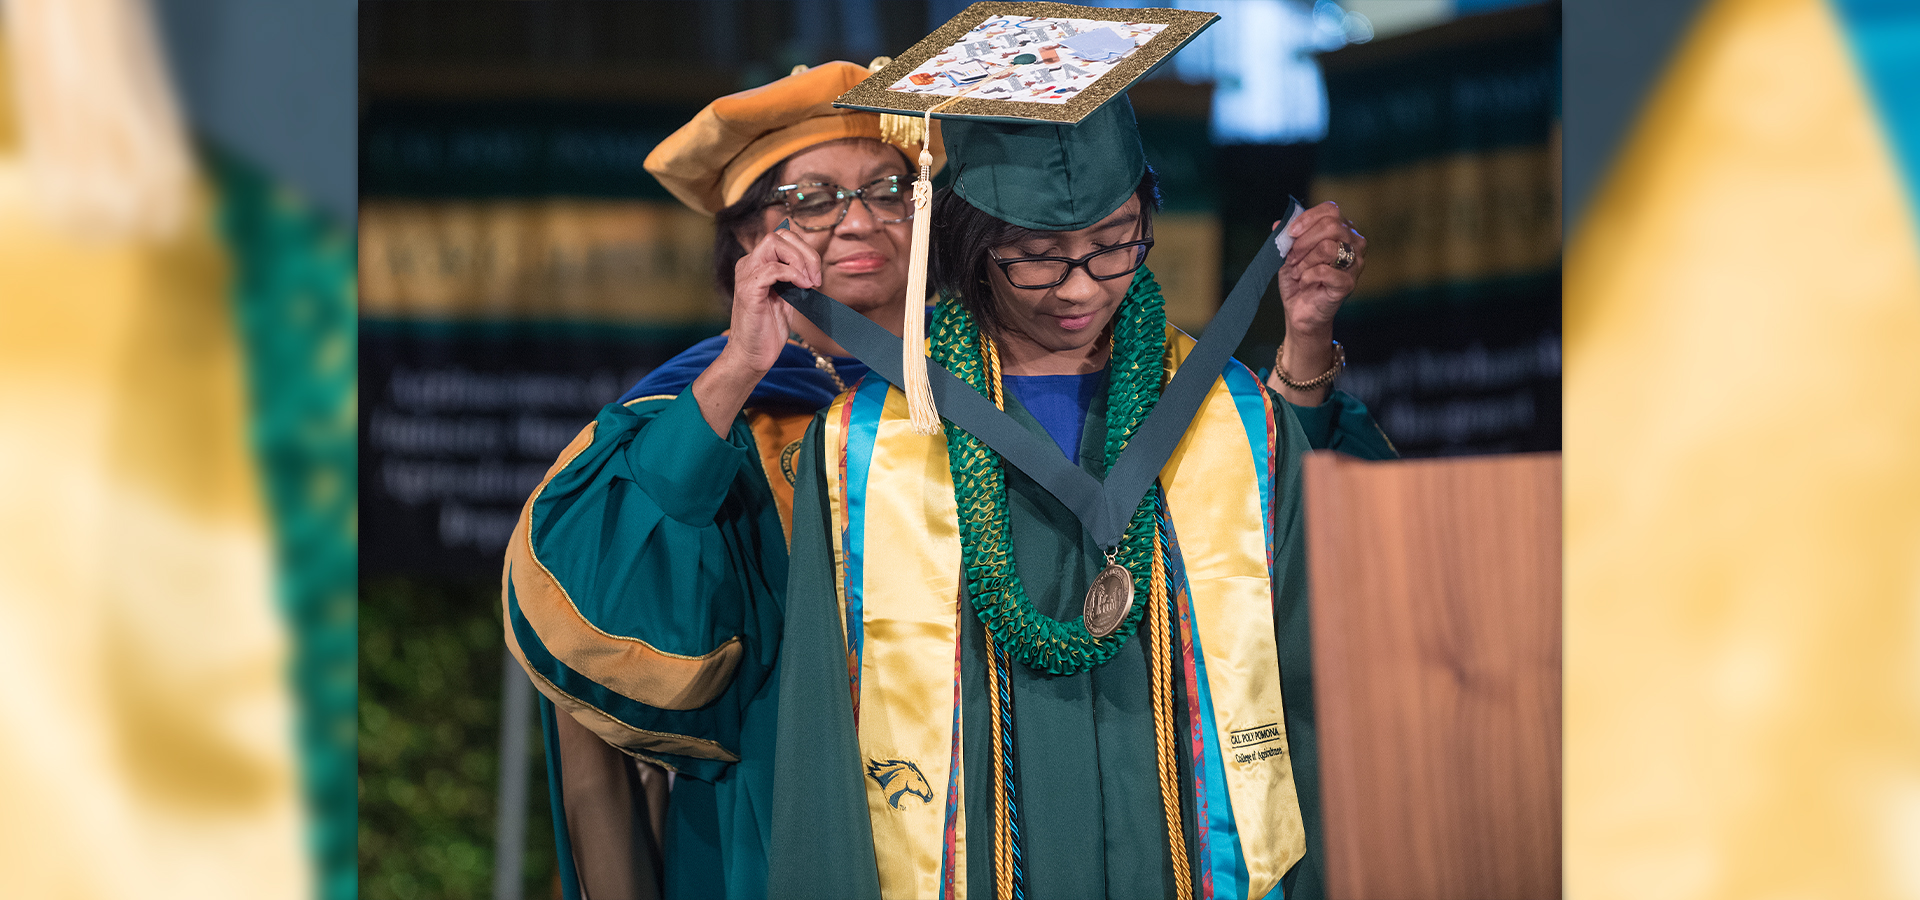 Cal Poly Pomona President Soraya Coley bestows a medallion upon a student at commencement.